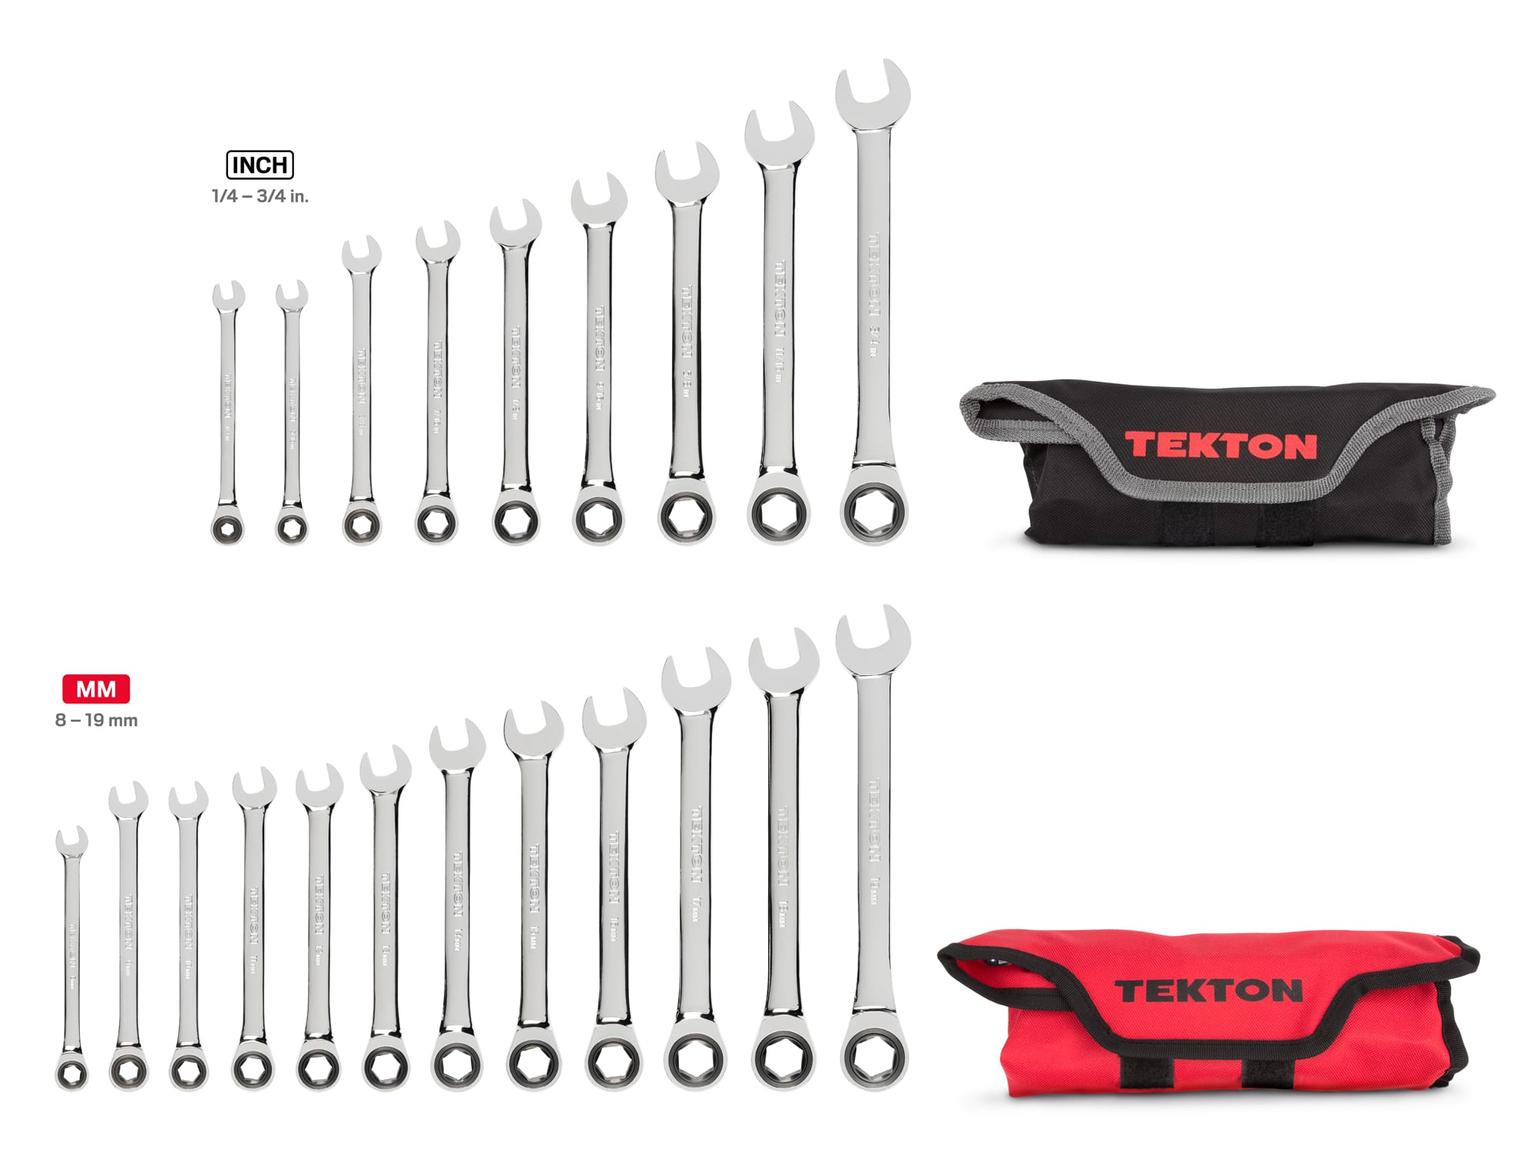 TEKTON WRN53361-T Ratcheting Combination Wrench Set with Pouch, 21-Piece (1/4-3/4 in., 8-19 mm)